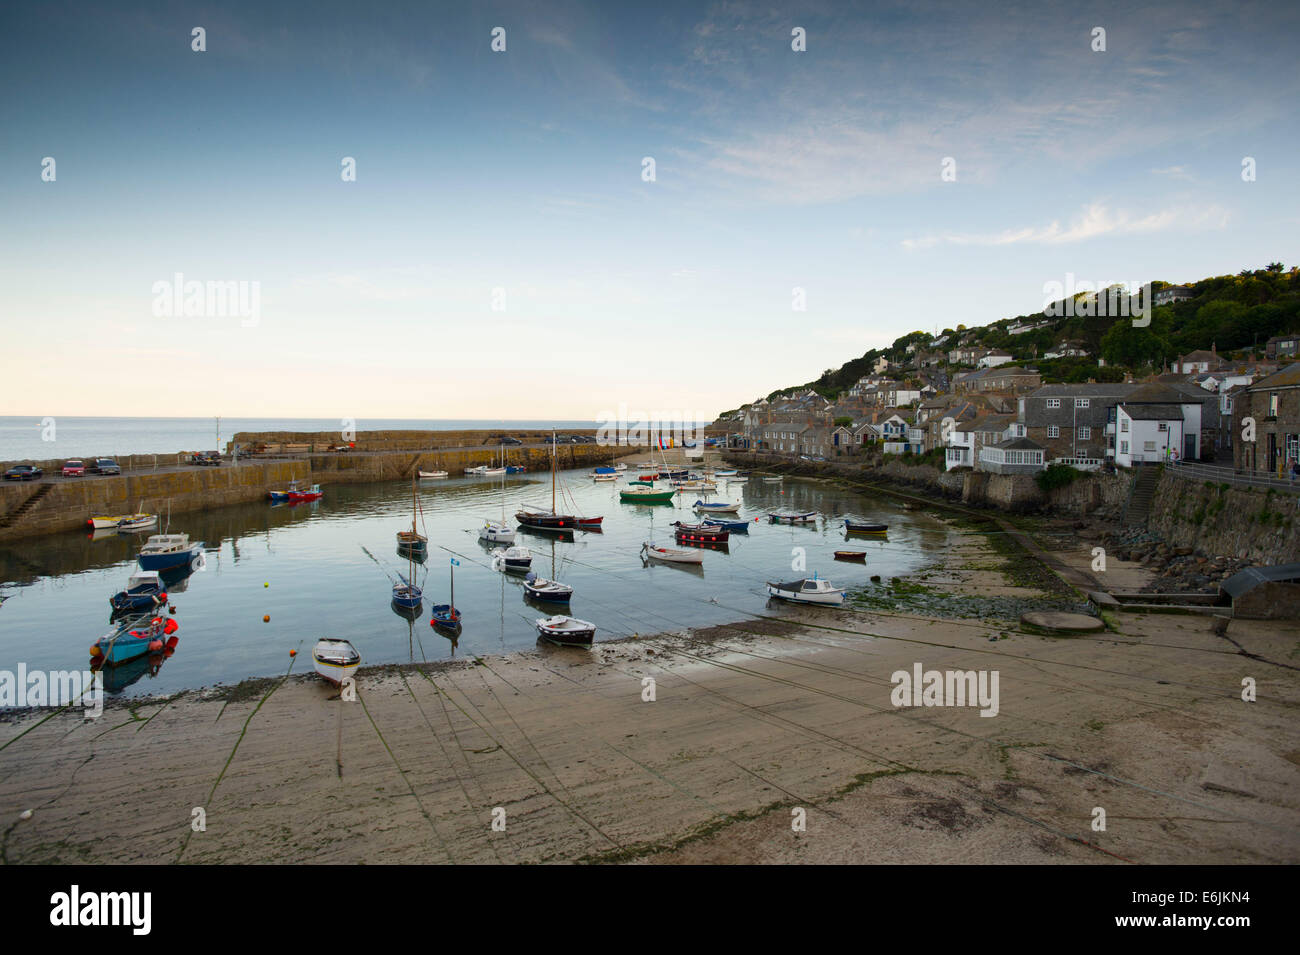 Tourist destination Mousehole Harbour in Cornwall, England. Stock Photo